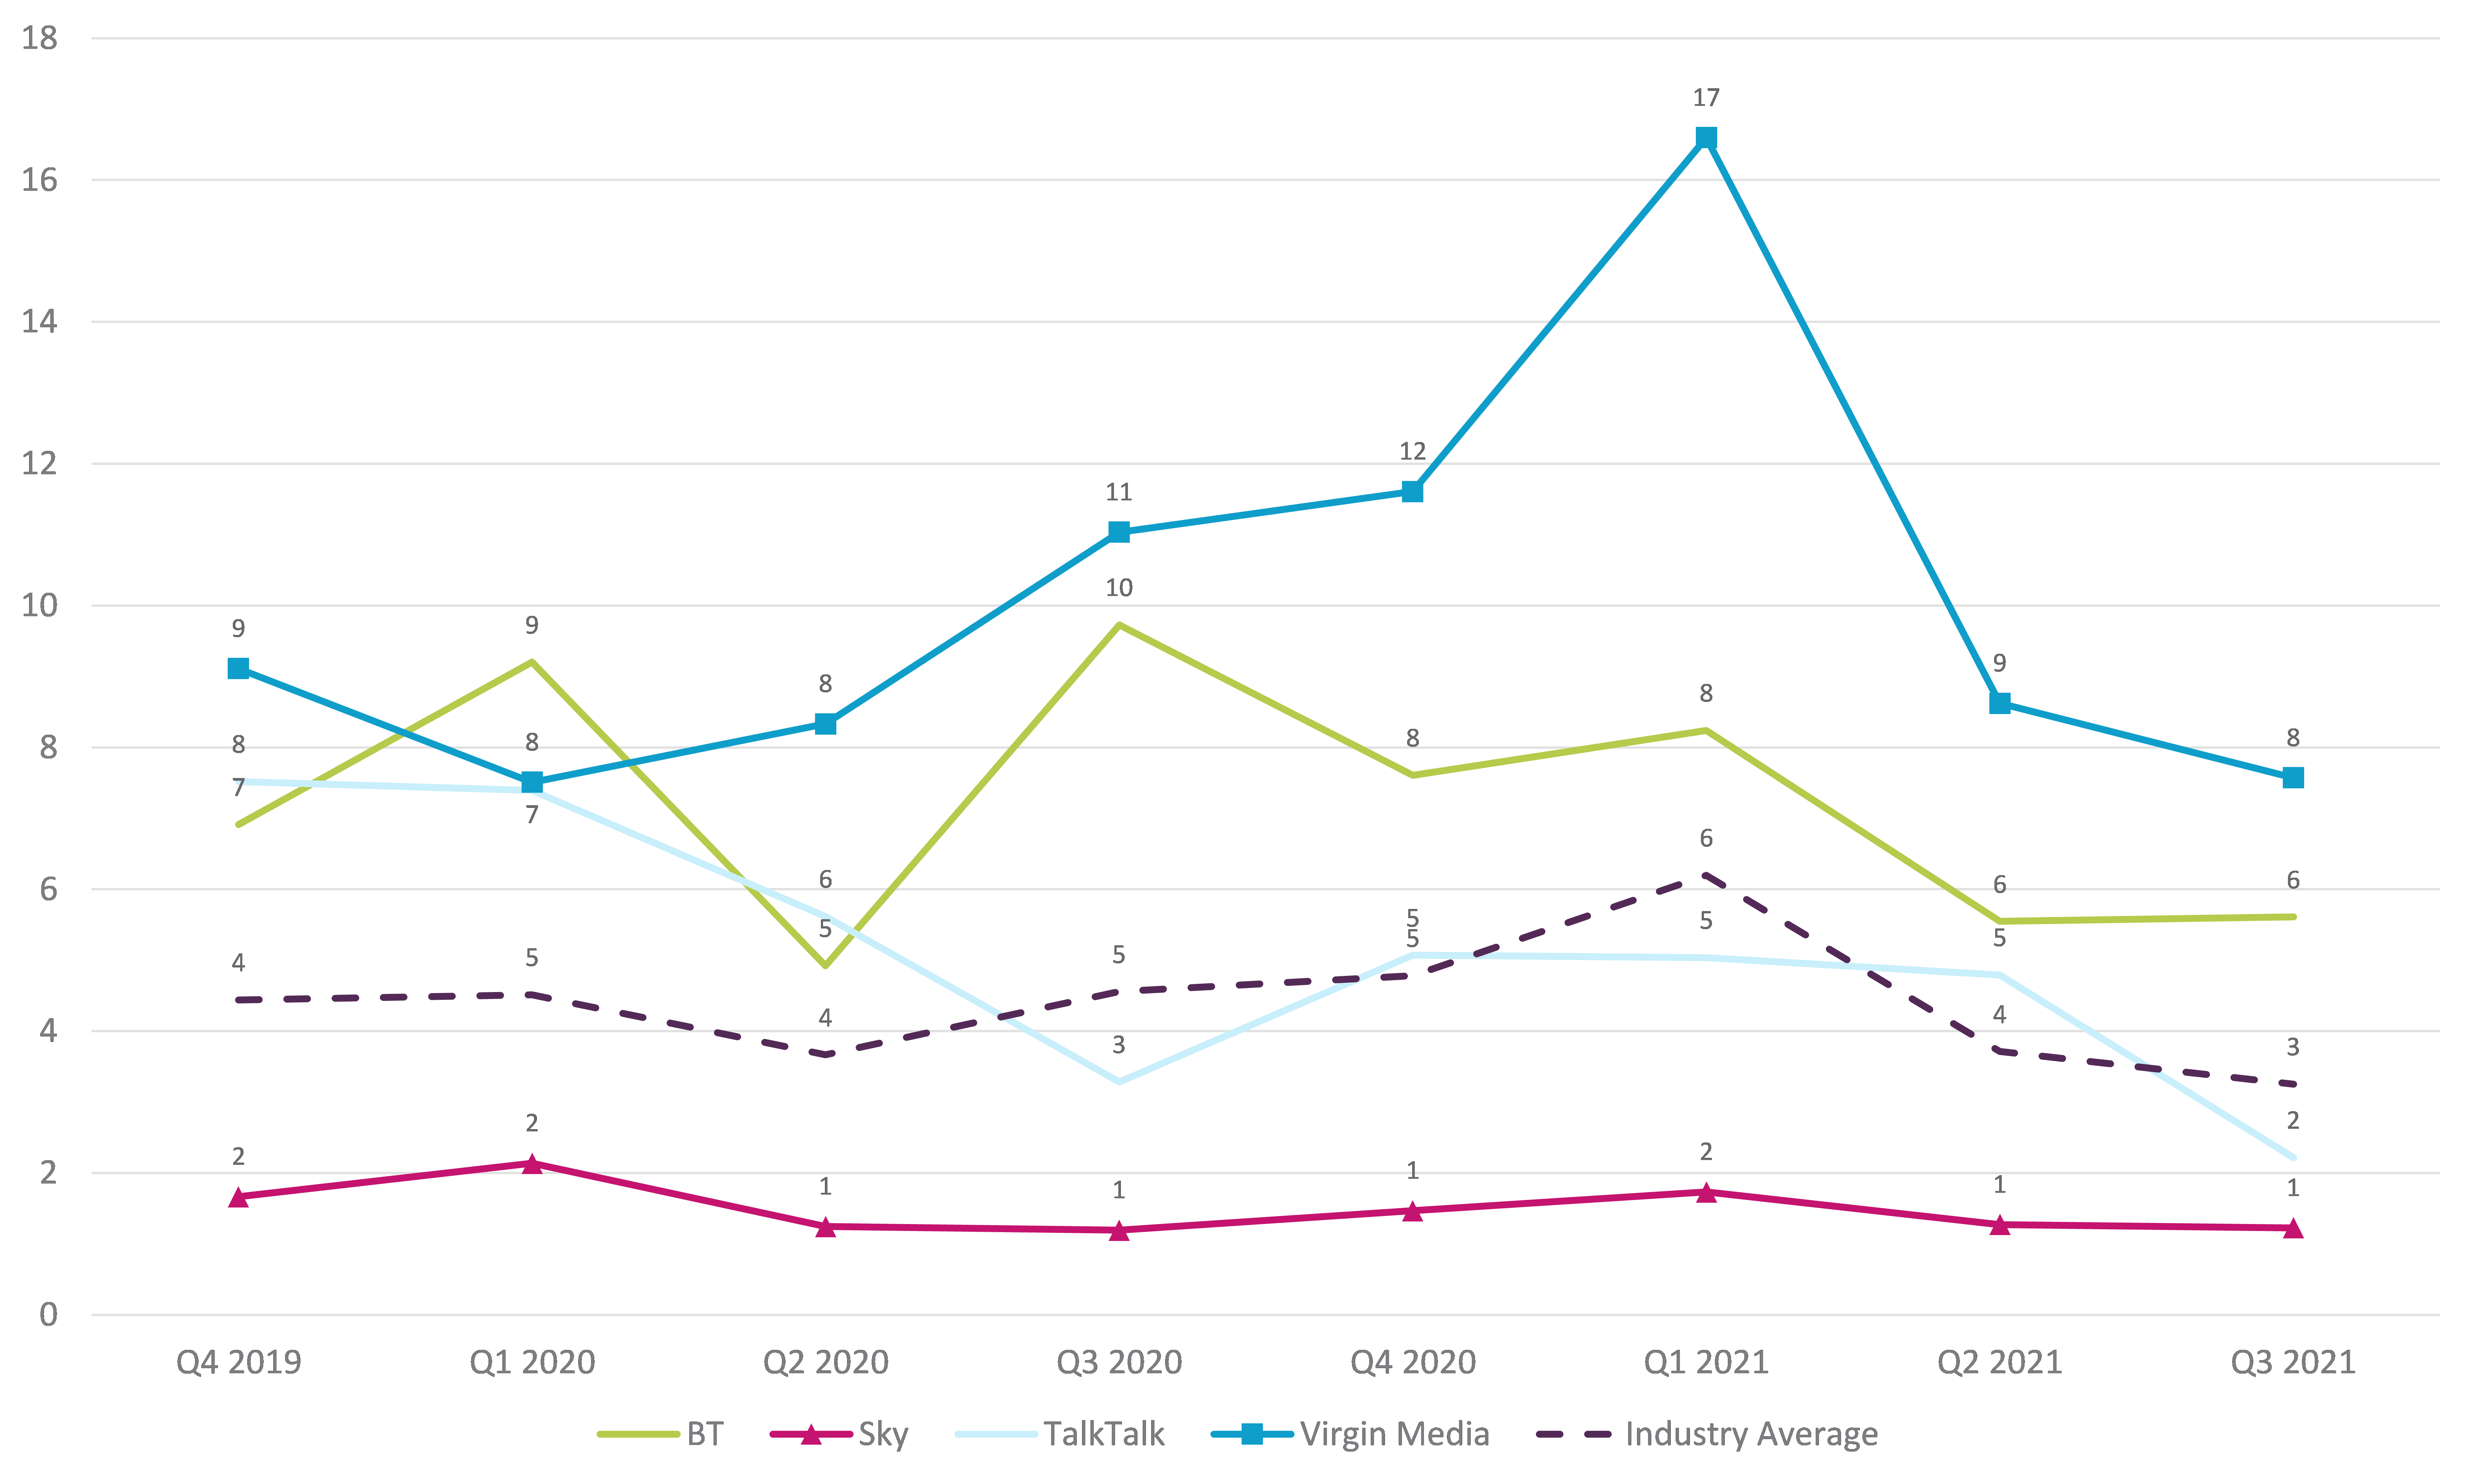 Graph showing trend data on residential consumer complaints received by Ofcom across pay tv by communications provider.   It shows the pay tv complaints per 100,000 subscribers for the Q4 2019 – Q3 2021 period.   Virgin Media generated the highest volume of pay-tv complaints (at 8) in Q3 2021 followed by TalkTalk at 6.  Sky generated the lowest volume of complaints at 1.